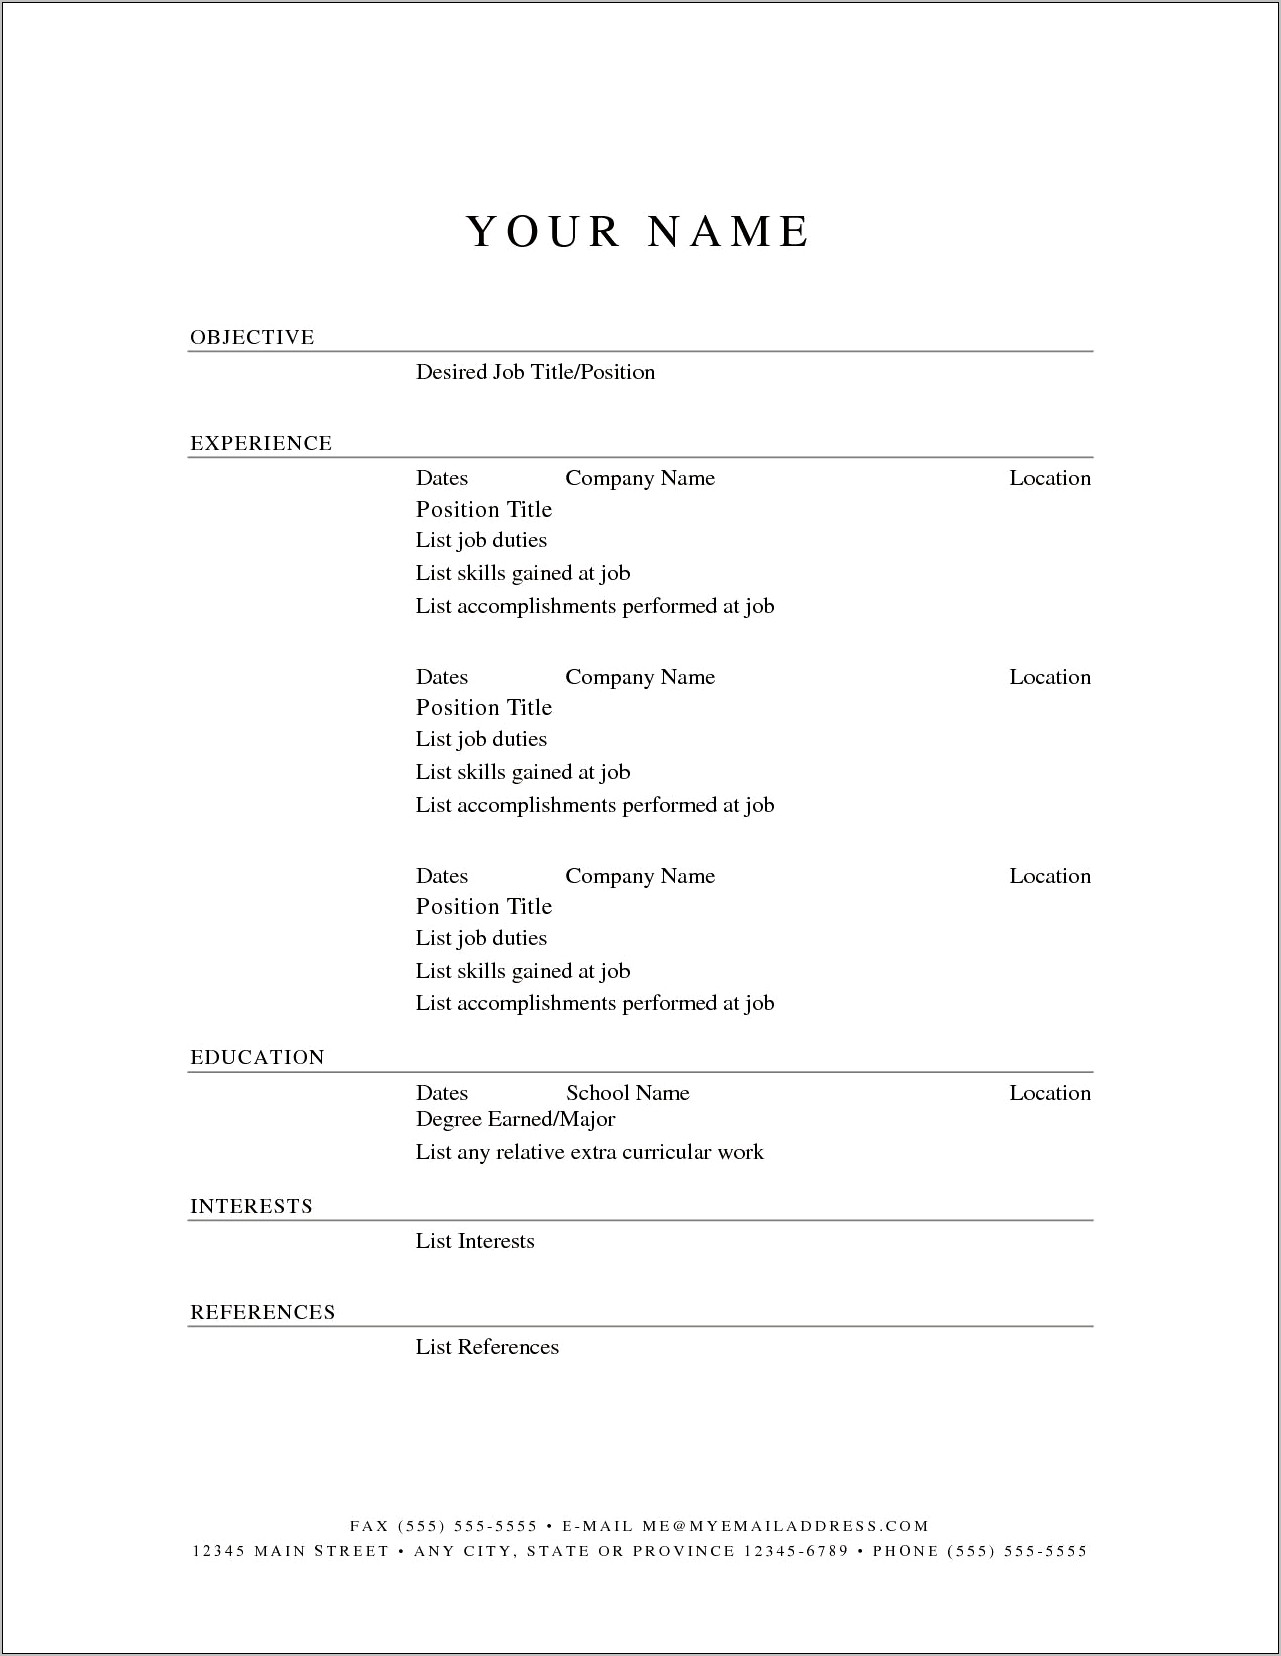 basic-resume-template-download-for-free-resume-example-gallery